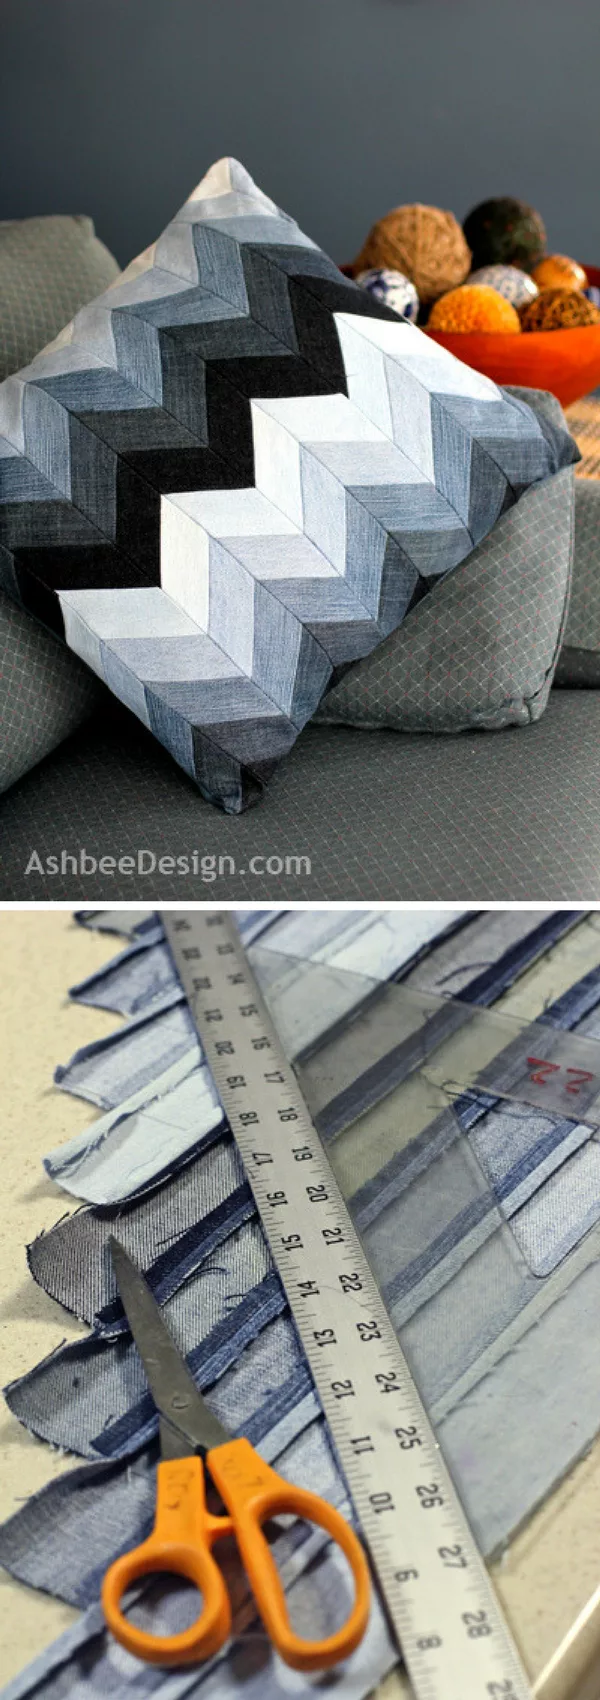 Check out how to make a decorative DIY chevron pillow from old jeans 